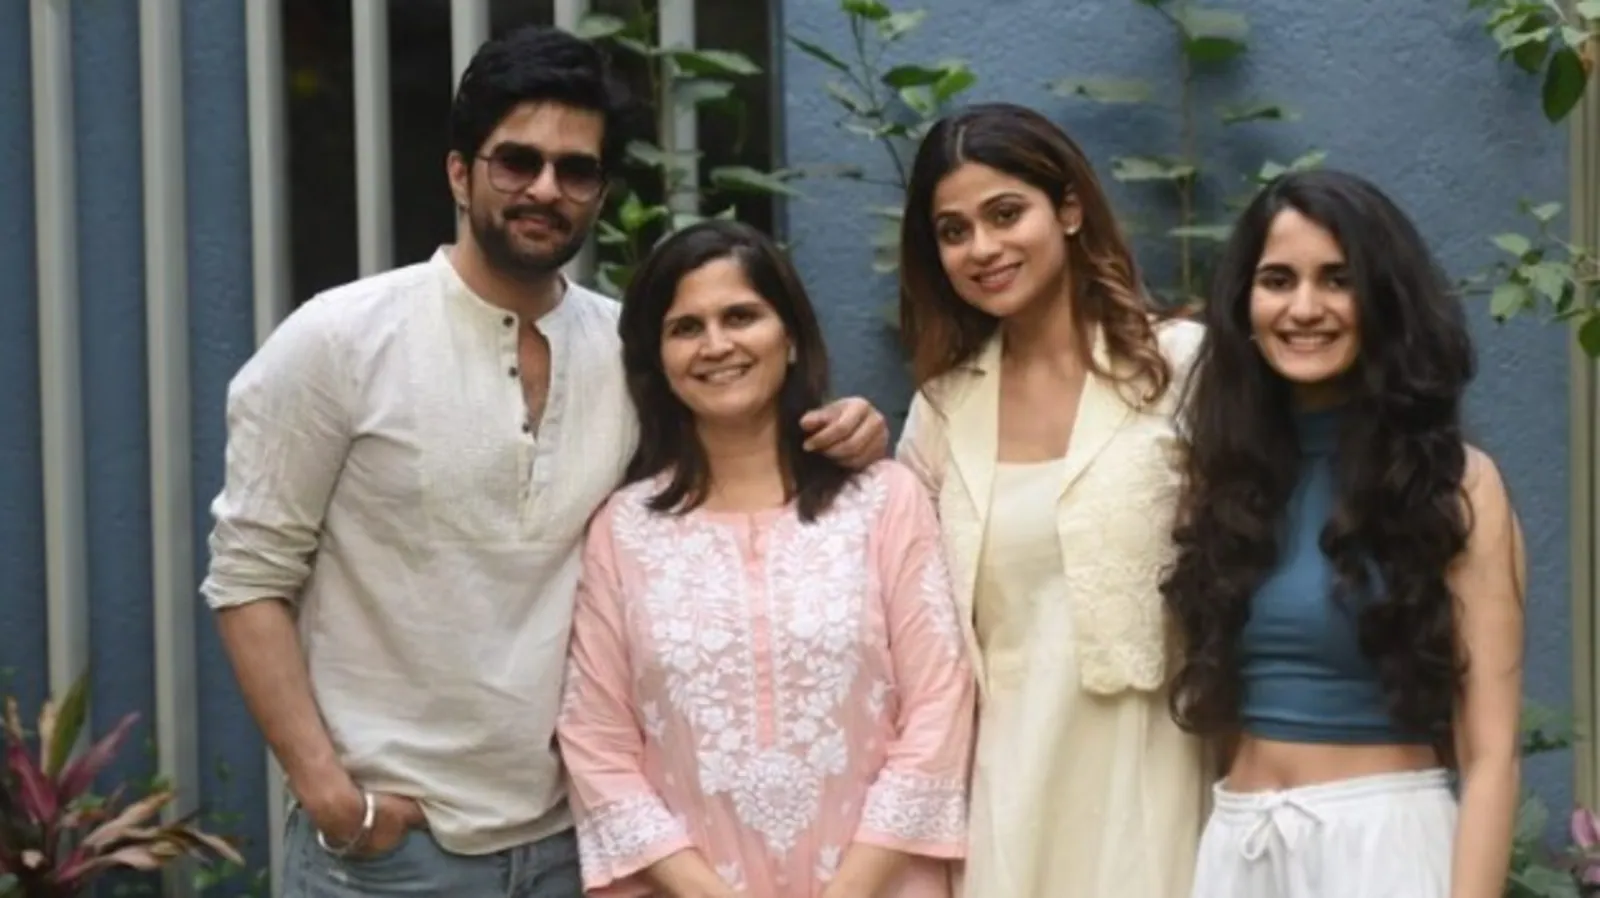 Shamita Shetty visits Raqesh Bapat’s family in Pune; fans say, ‘we weren’t ready for this.’ See pics